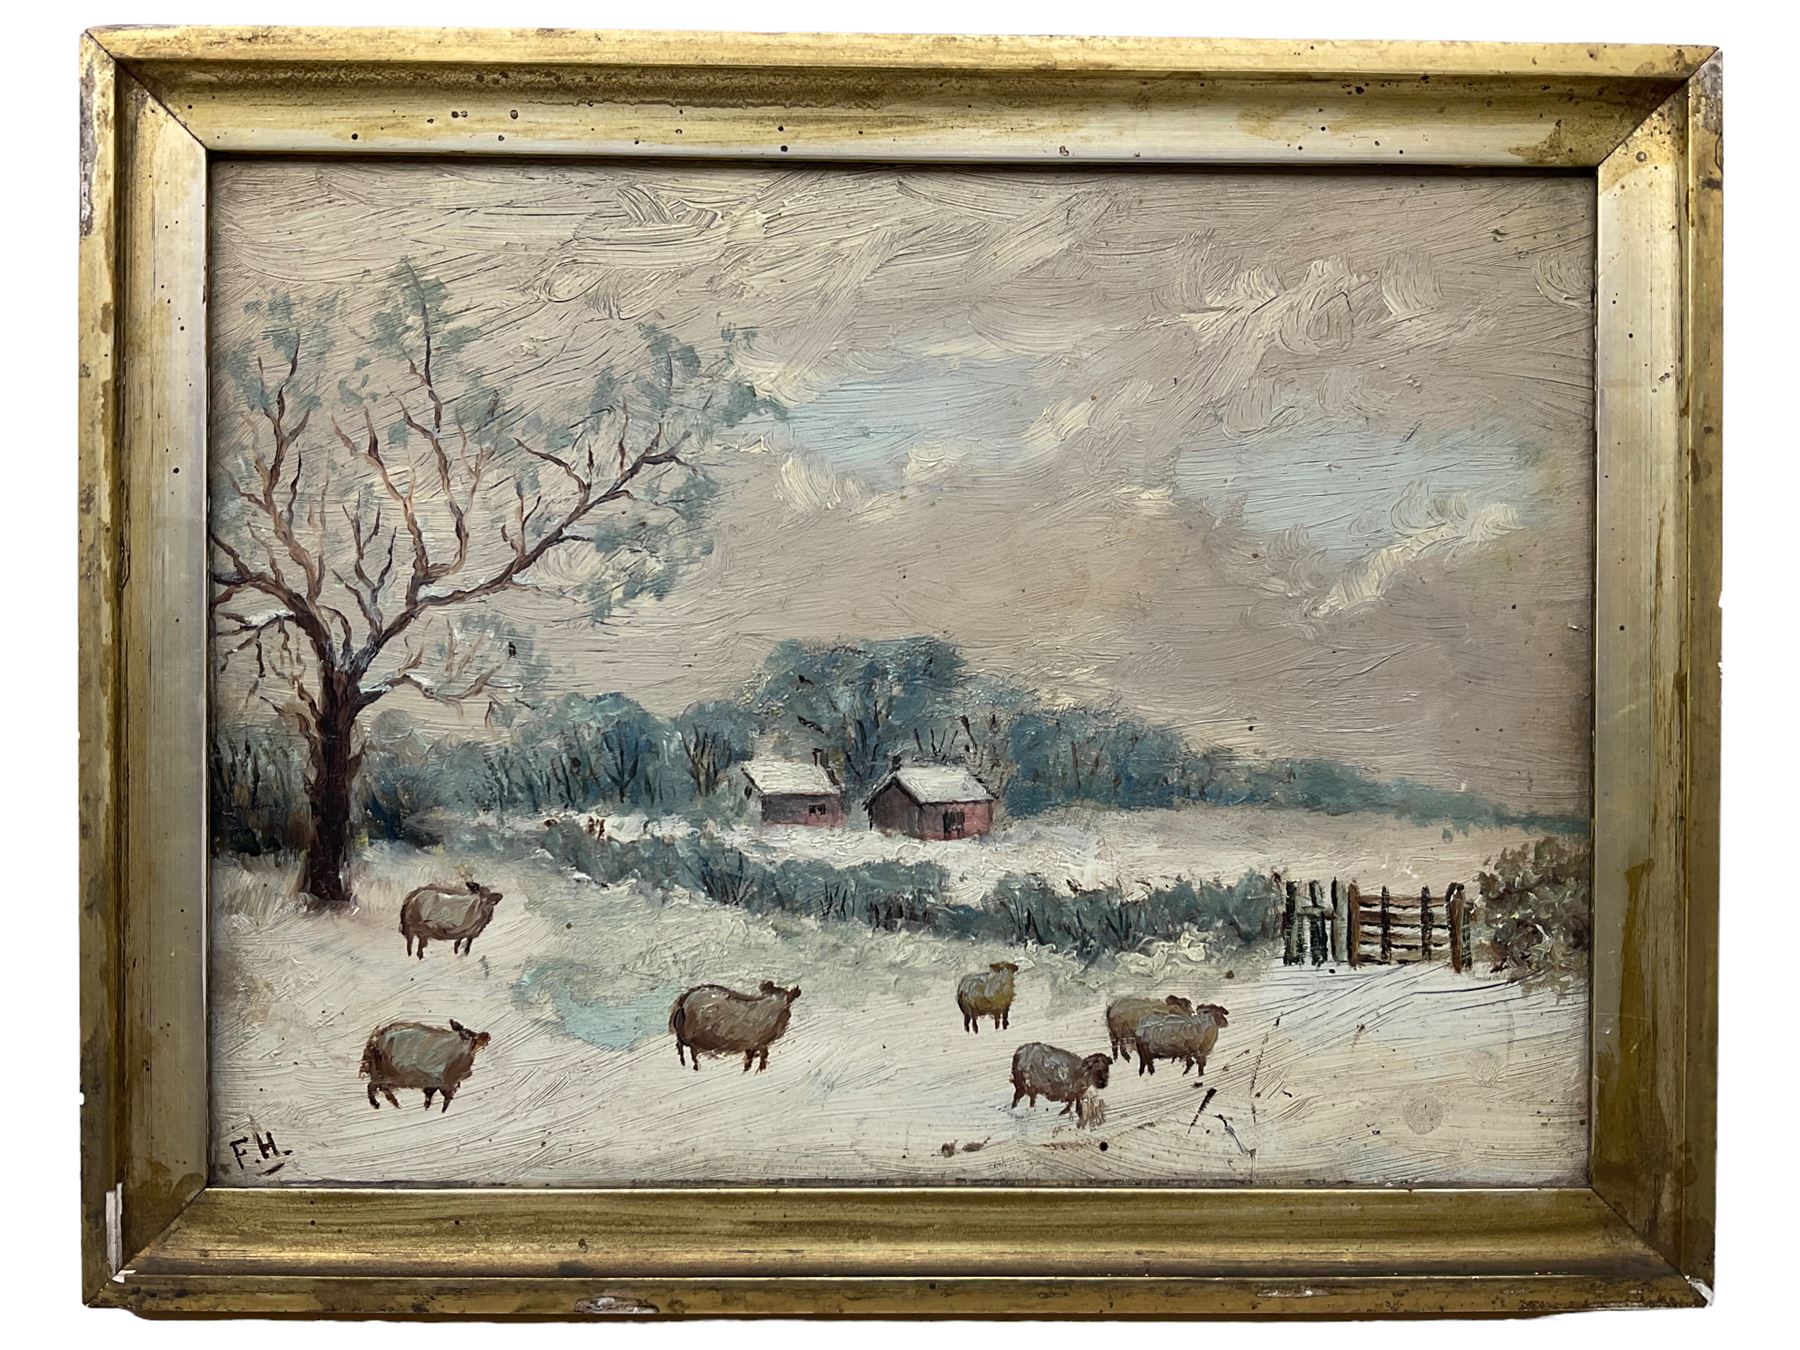 English Naive School (19th/20th century): Sheep in a Snowy Landscape - Image 2 of 2